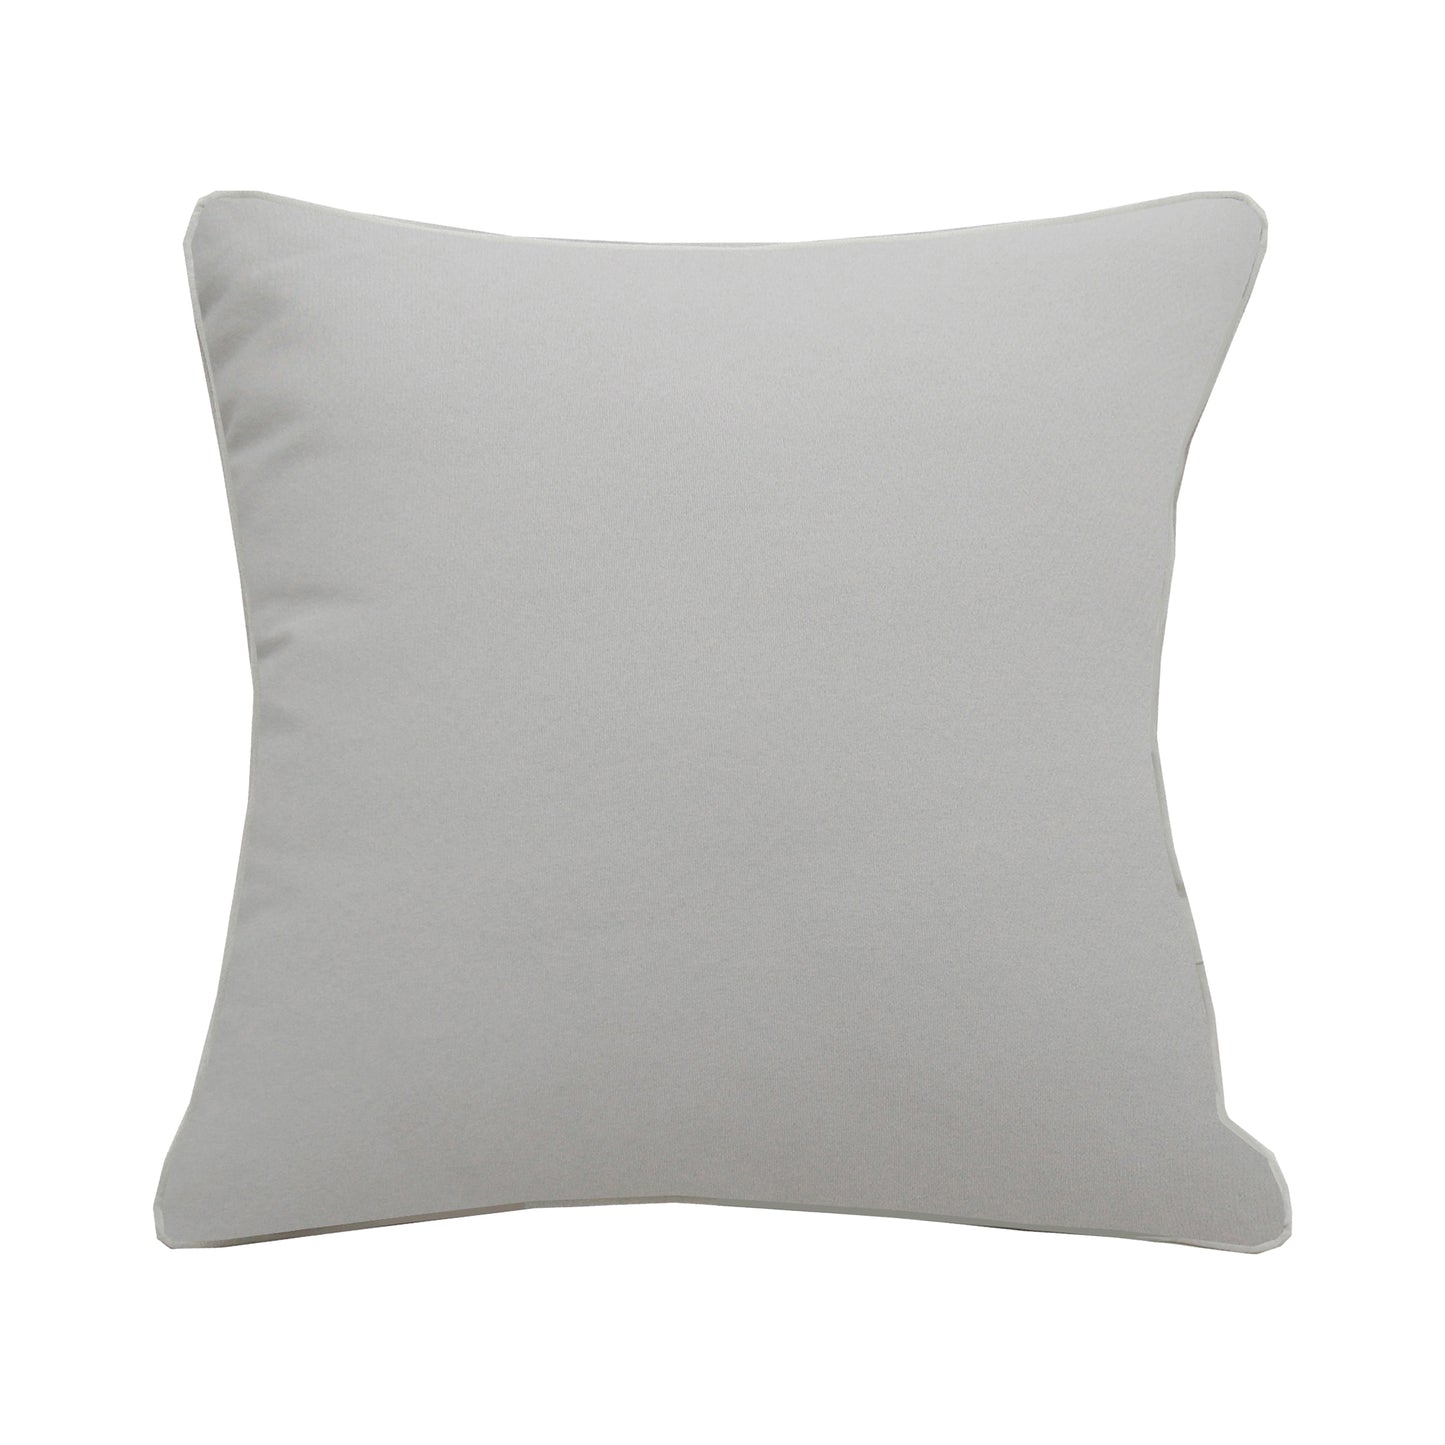 Back of the Winter Chill Neutral Indoor Outdoor Pillow